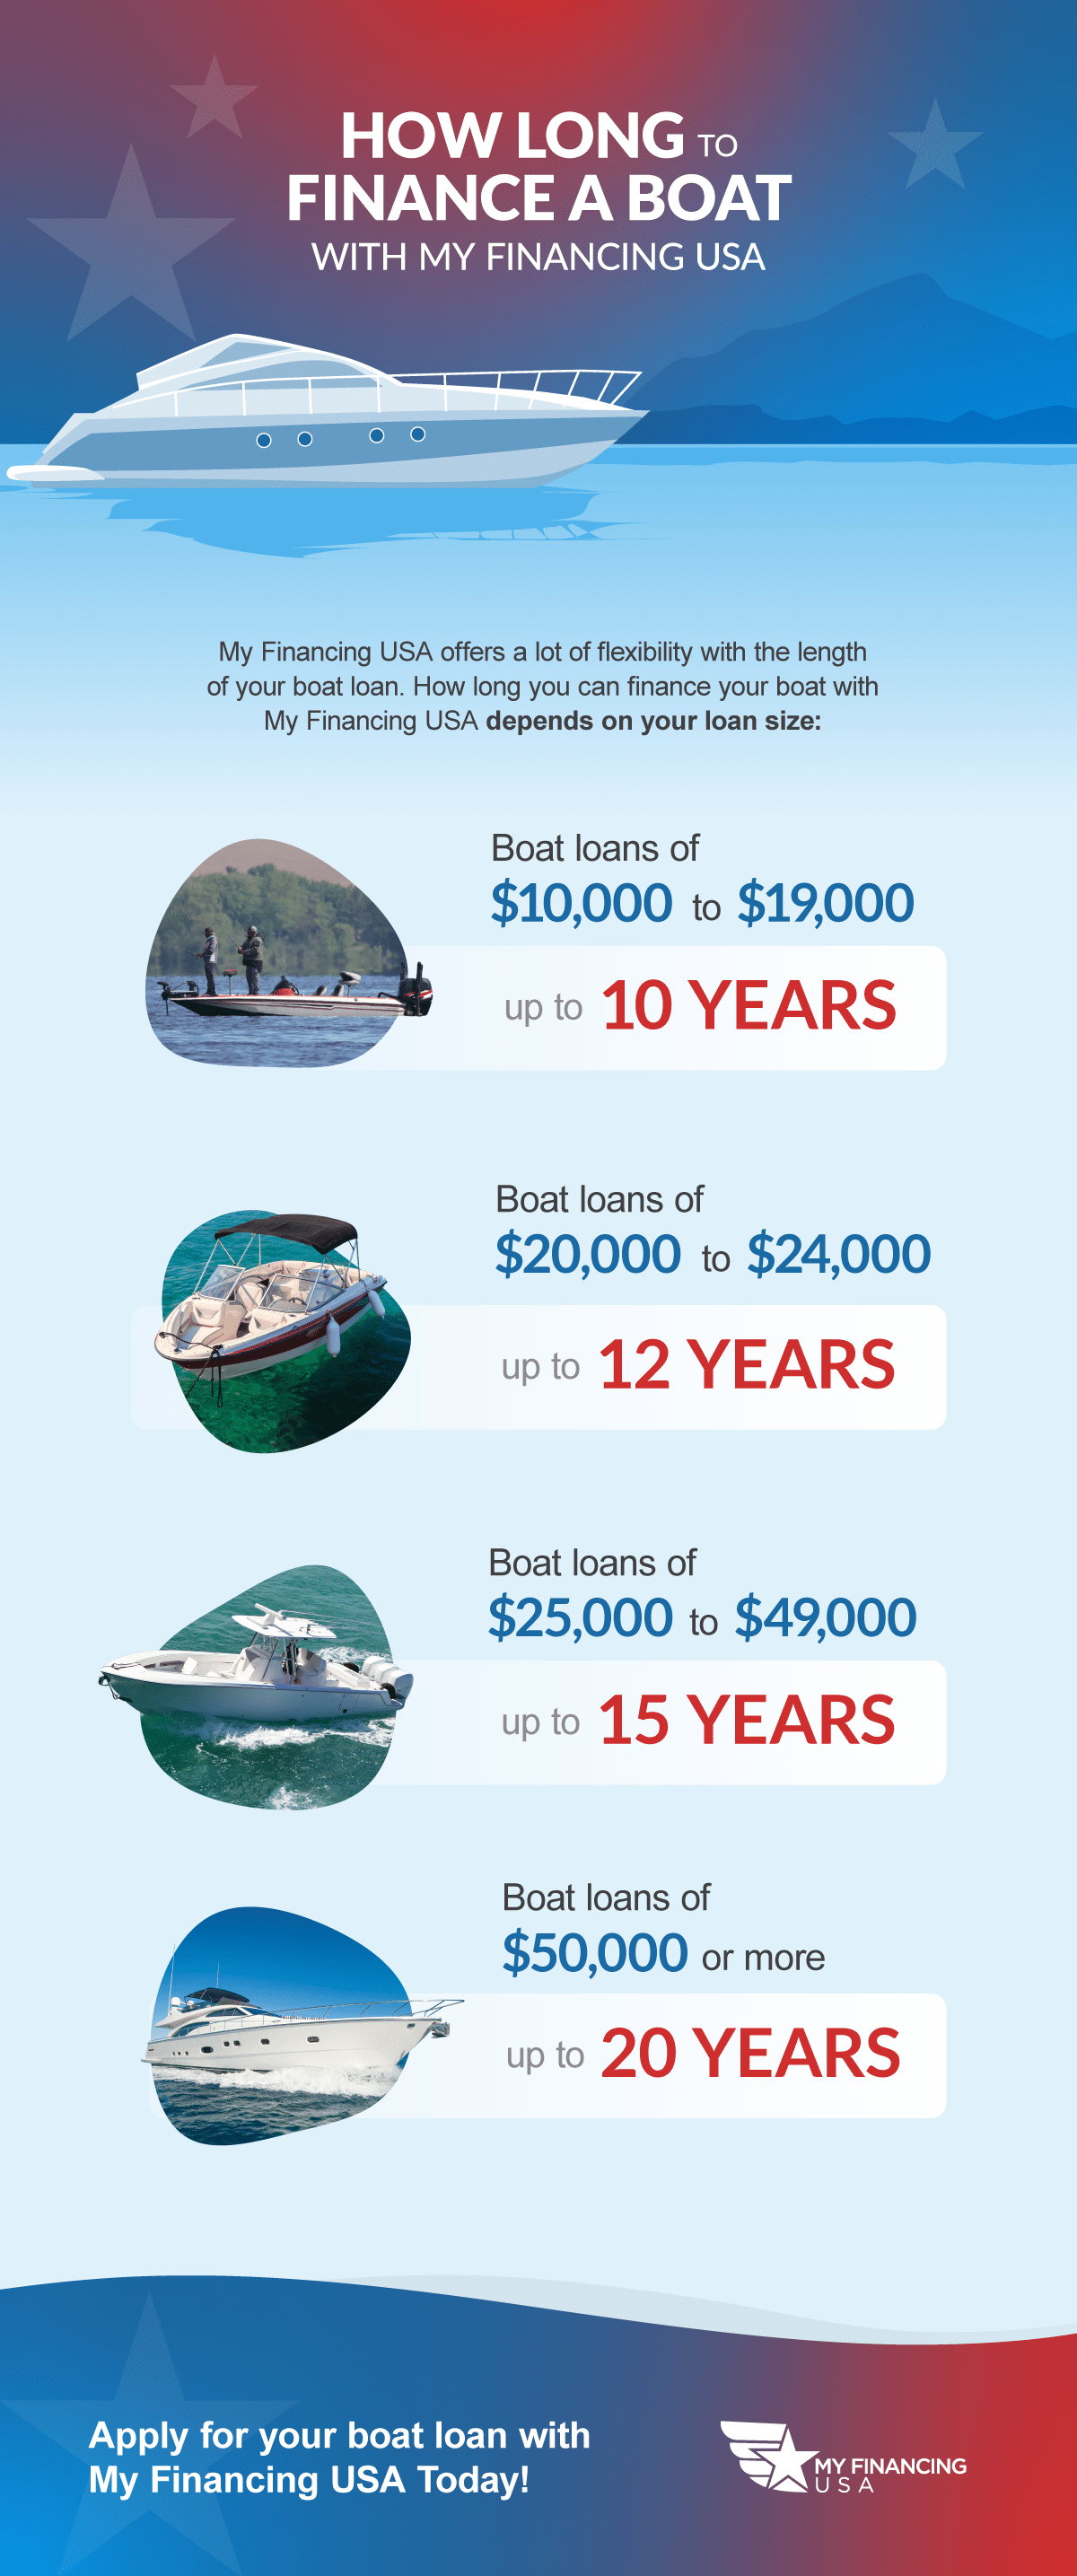 How long to finance a boat with My Financing USA. My Financing USA offers a lot of flexibility with the length of your boat loan. How long you can finance your boat depends on your loan size.